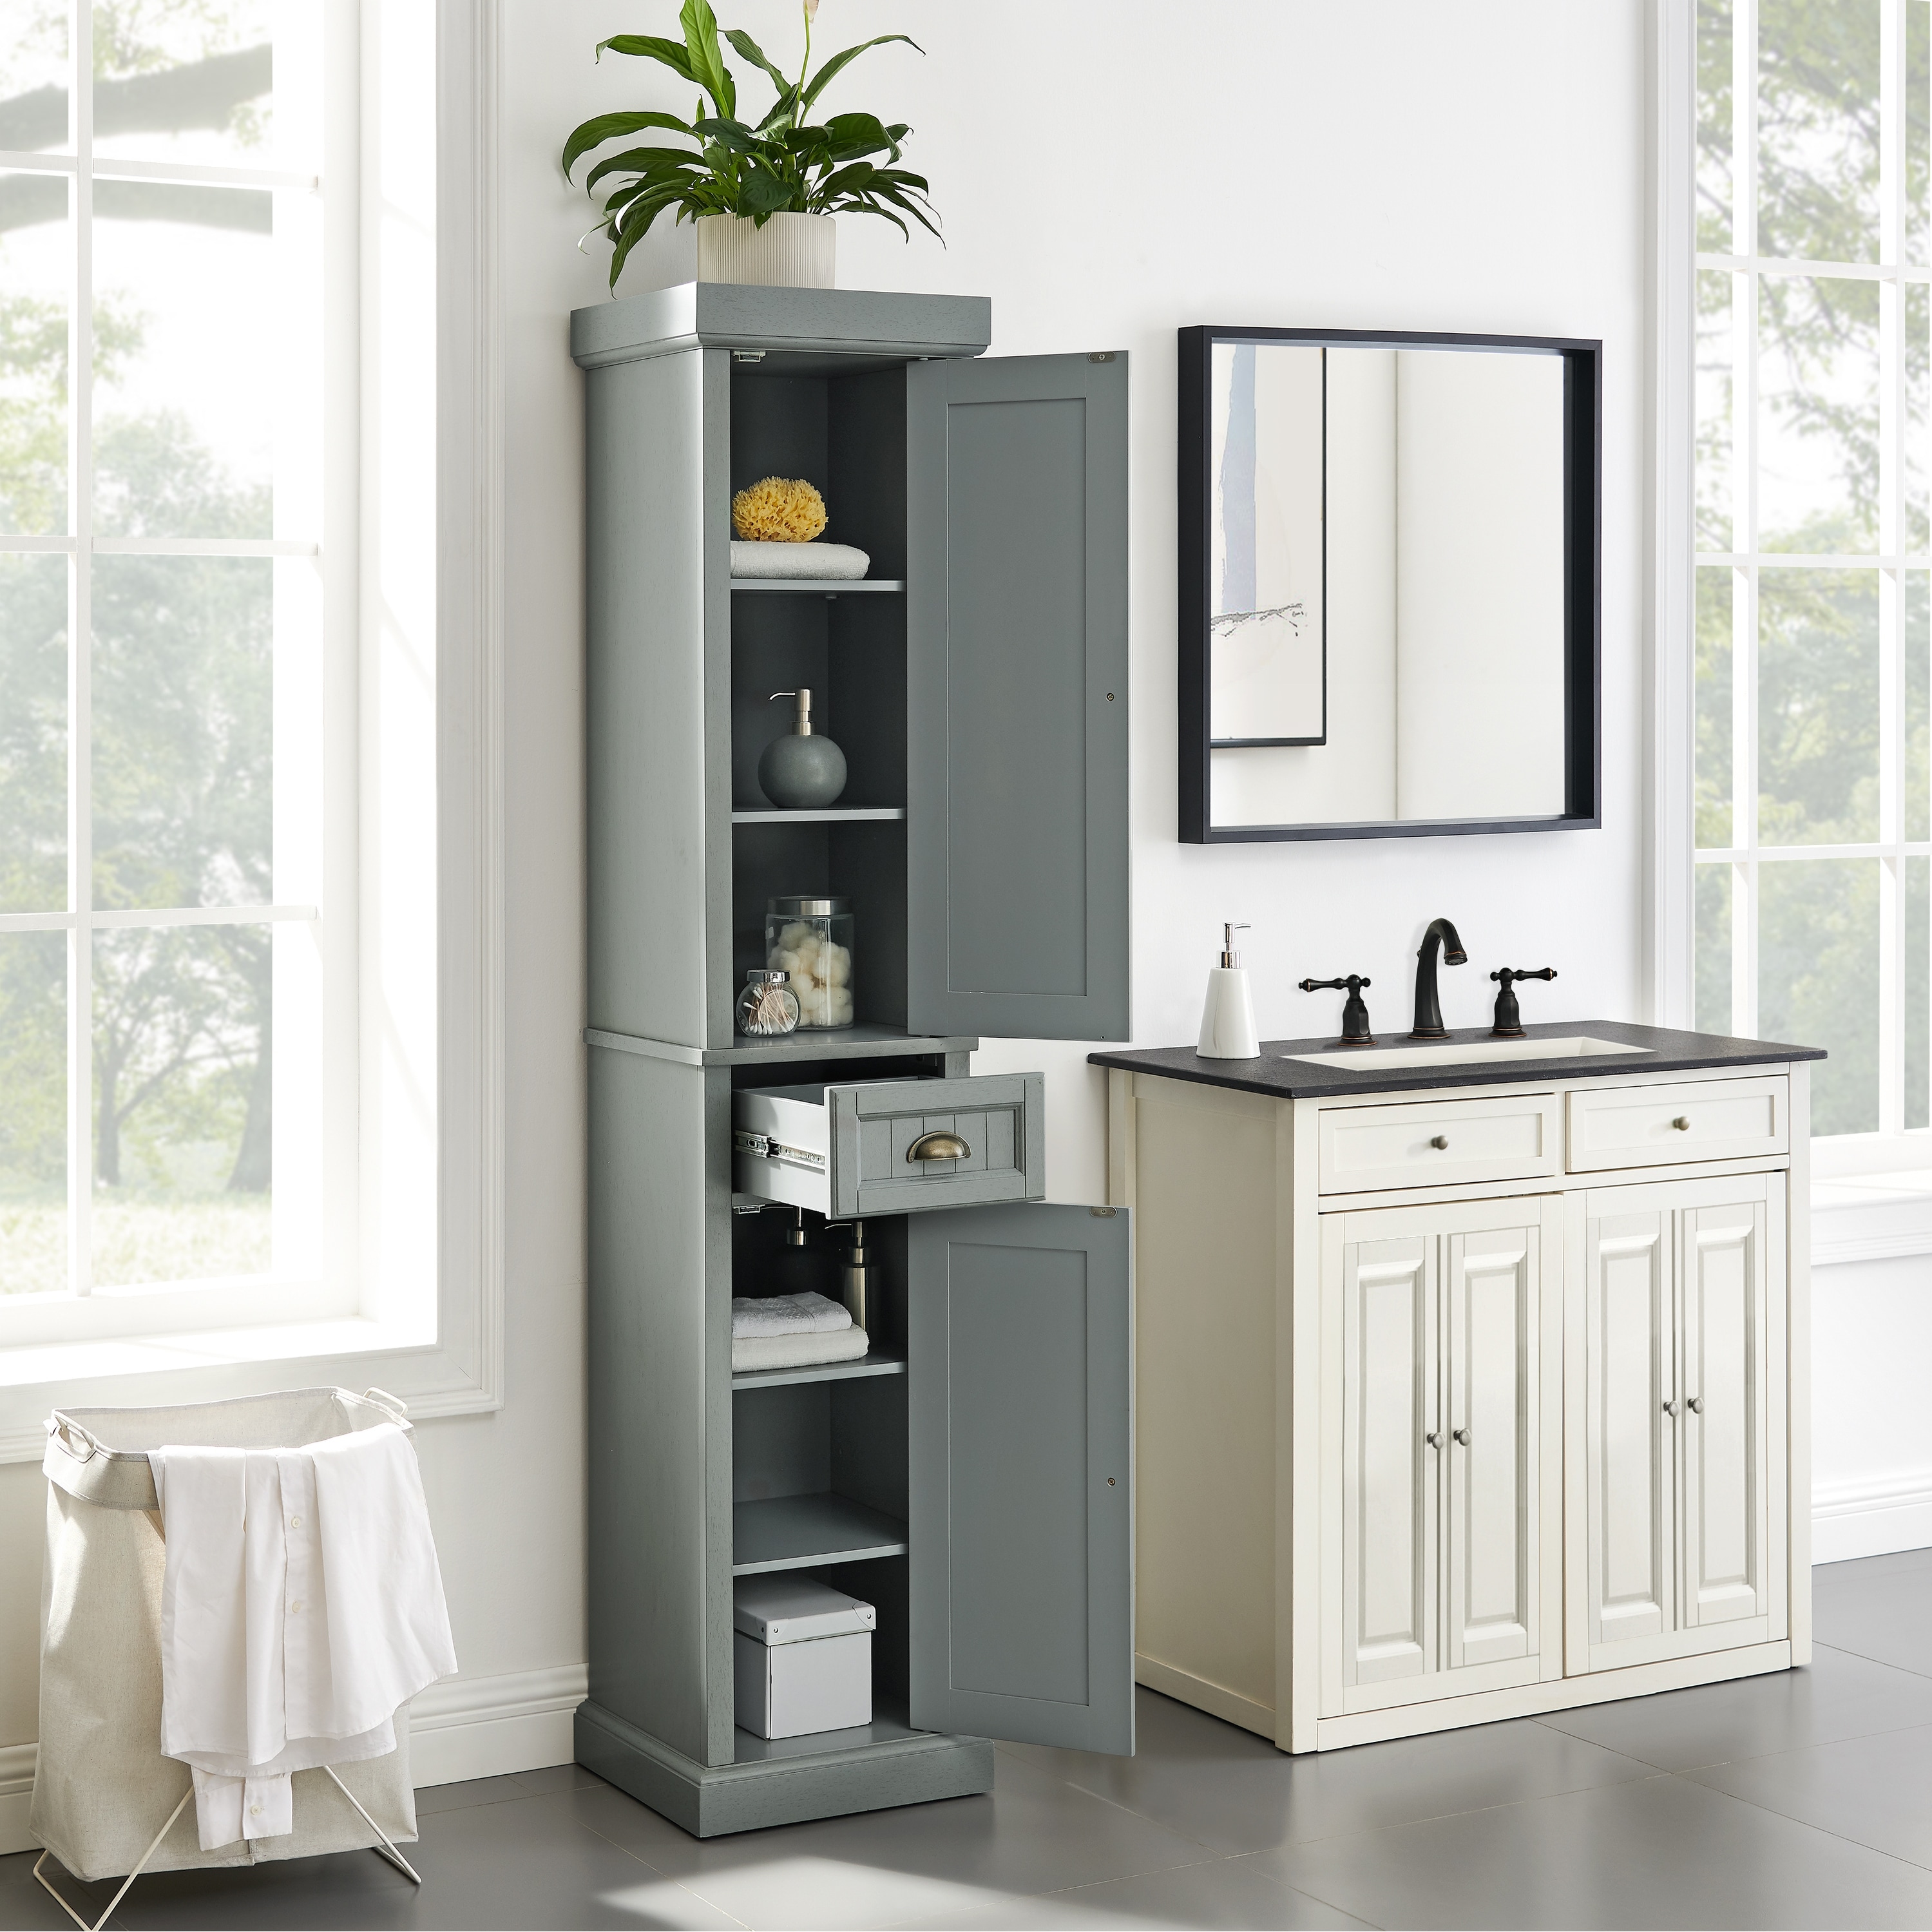 https://ak1.ostkcdn.com/images/products/is/images/direct/7e31c3016c4af7a26497130d5b5dc7e54b9fd83f/Seaside-Tall-Linen-Cabinet.jpg